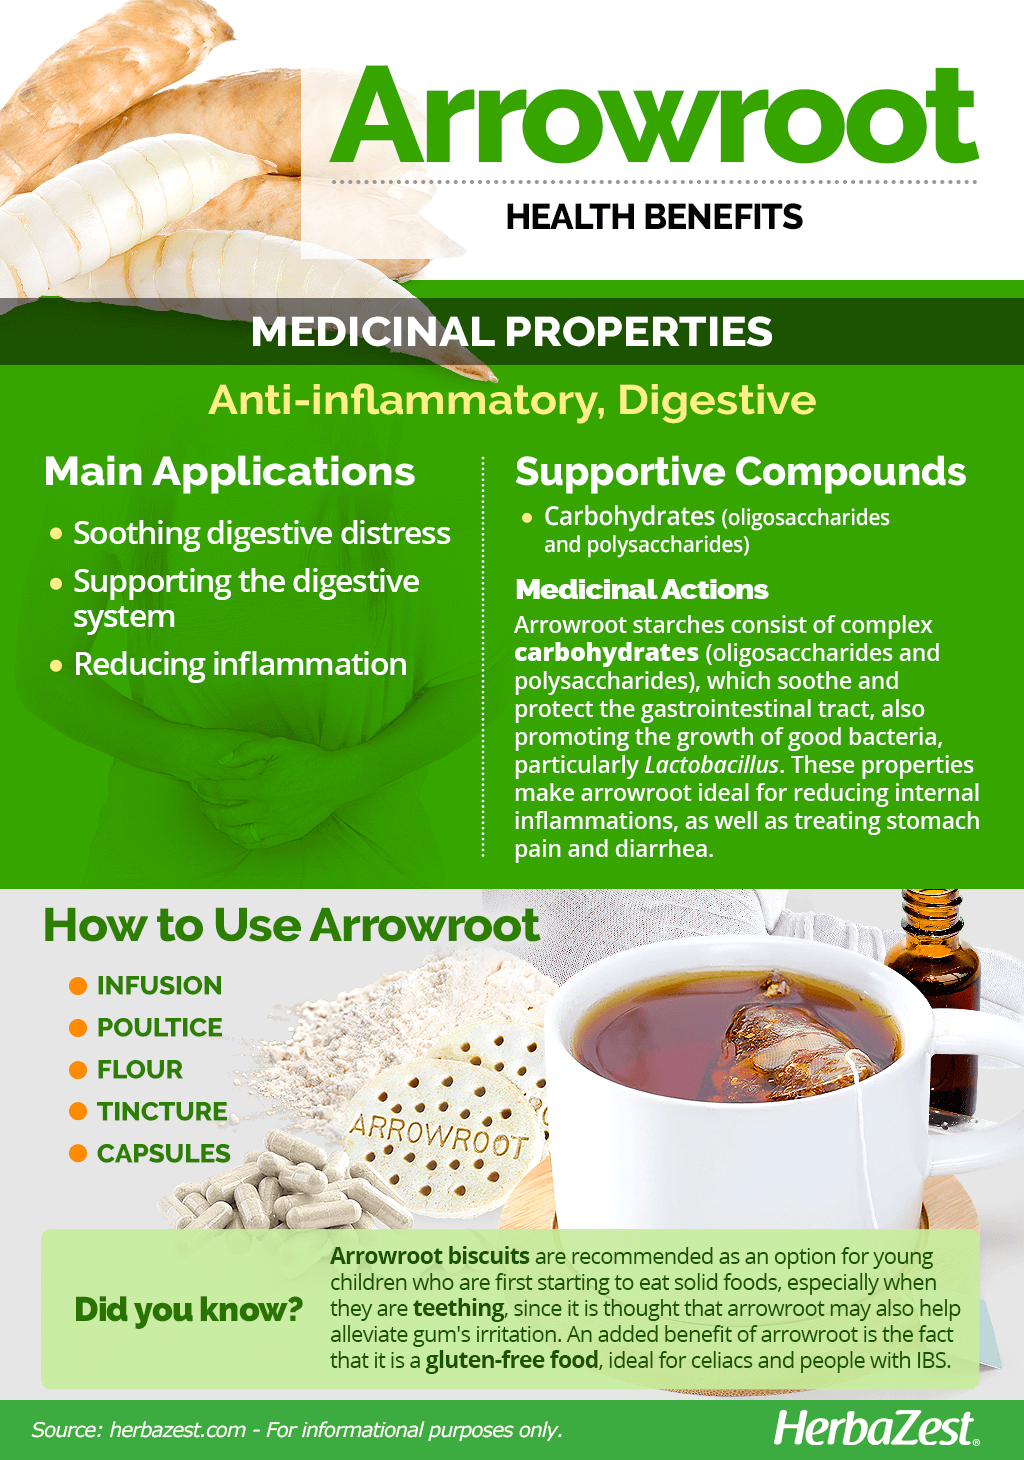 All About Arrowroot